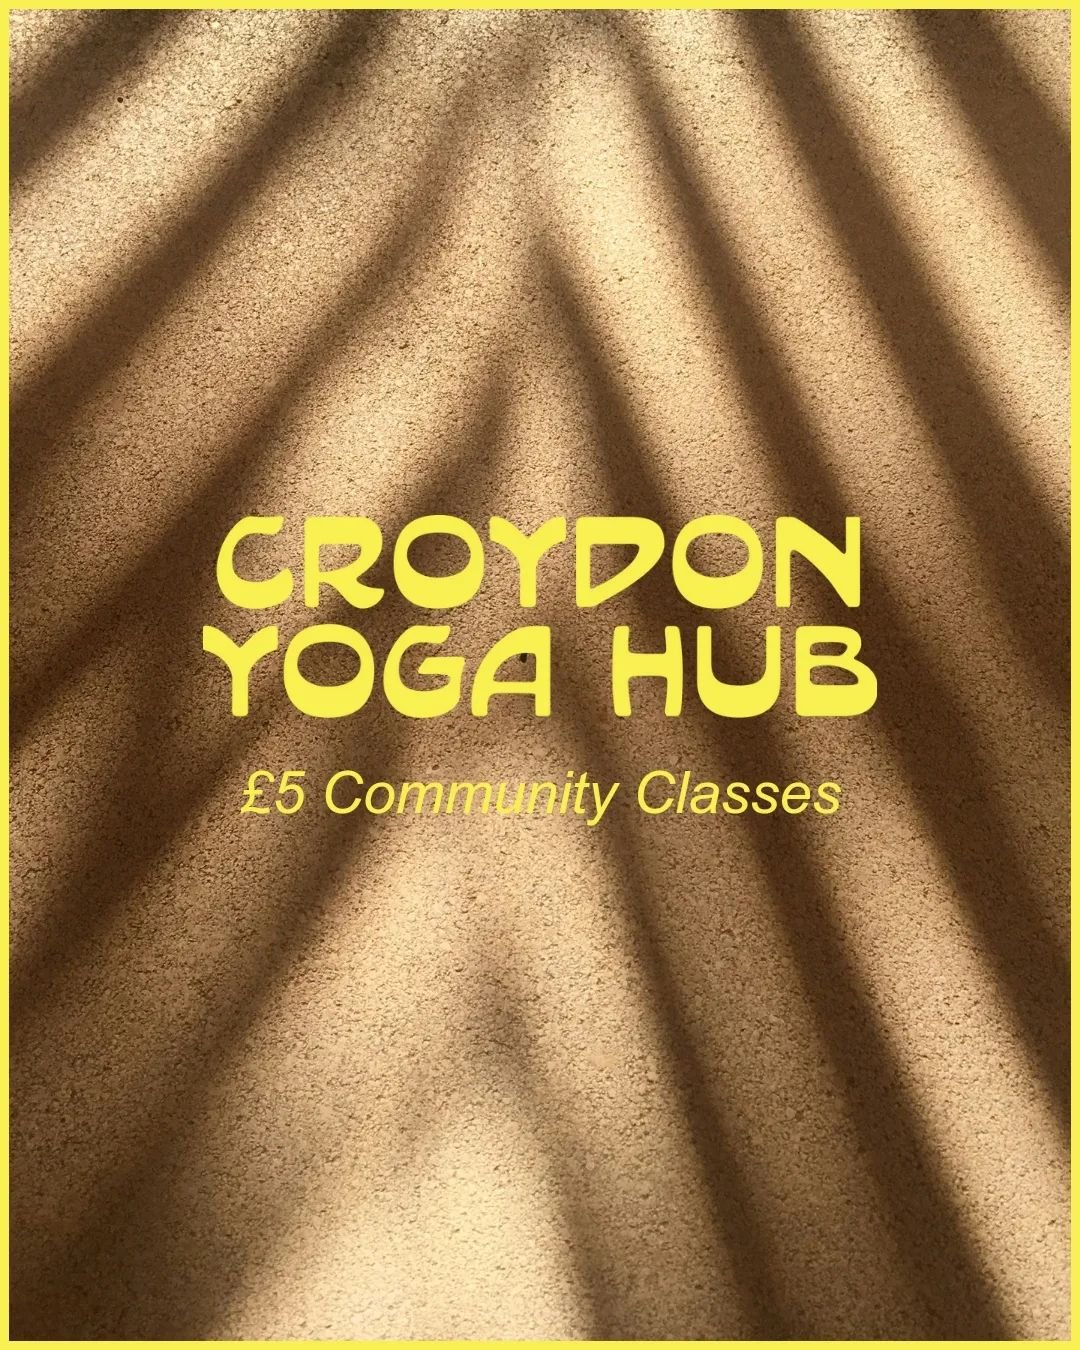 We are proud to be launching &pound;5 Community Classes at Croydon Yoga Hub!

These classes will be a chance for us to trial innovative class concepts and invite new teachers to the studio whilst also offering a more affordable option to our communit